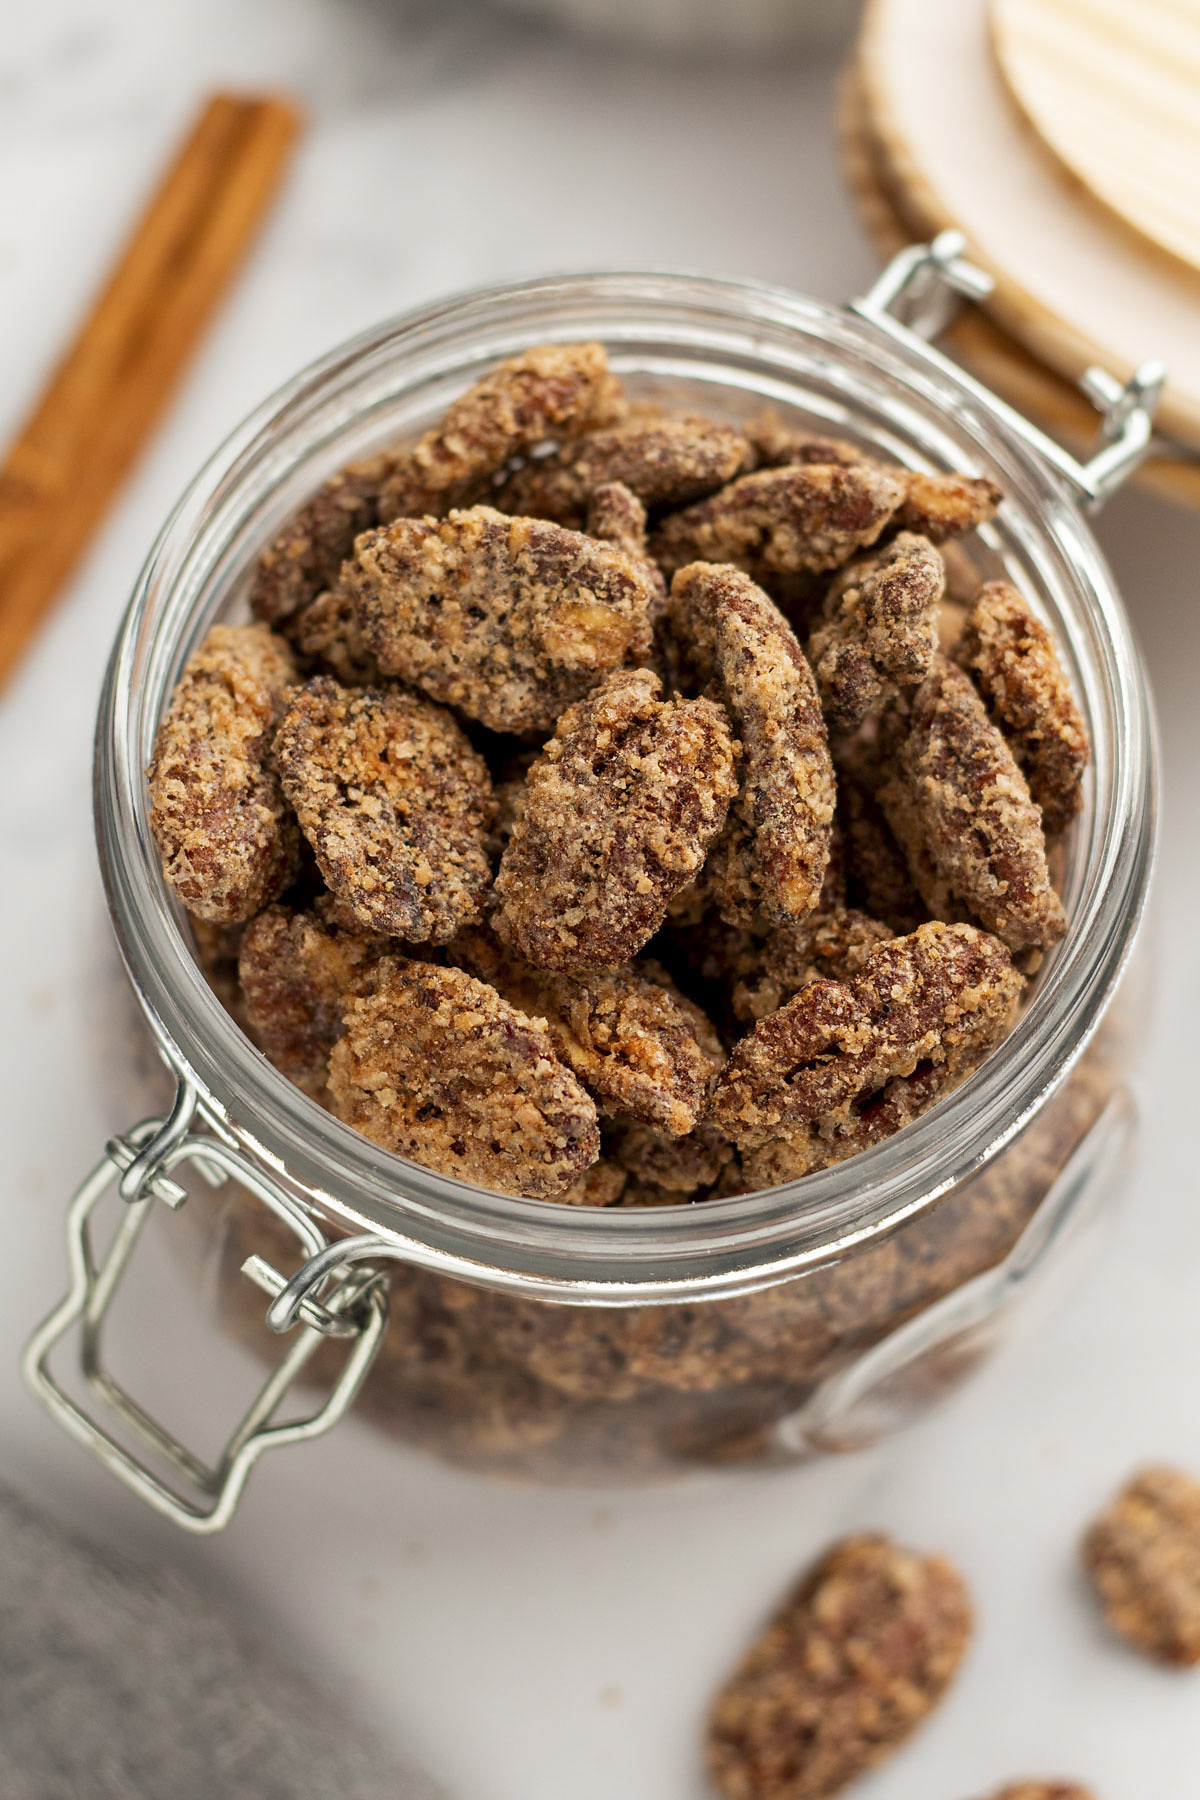 Candied pecans in a jar.